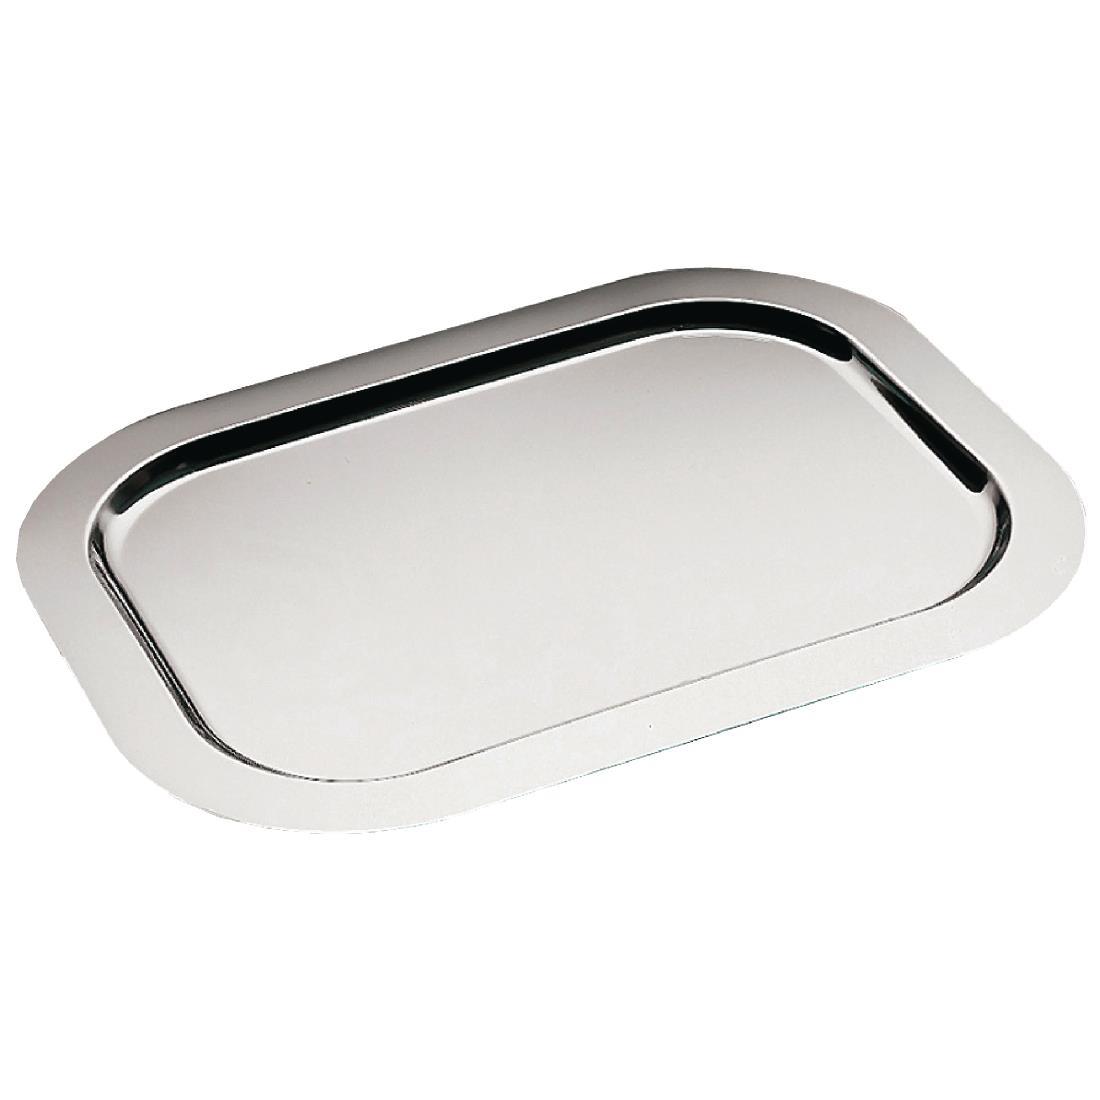 APS Small Stainless Steel Service Tray 480mm - T744  - 1